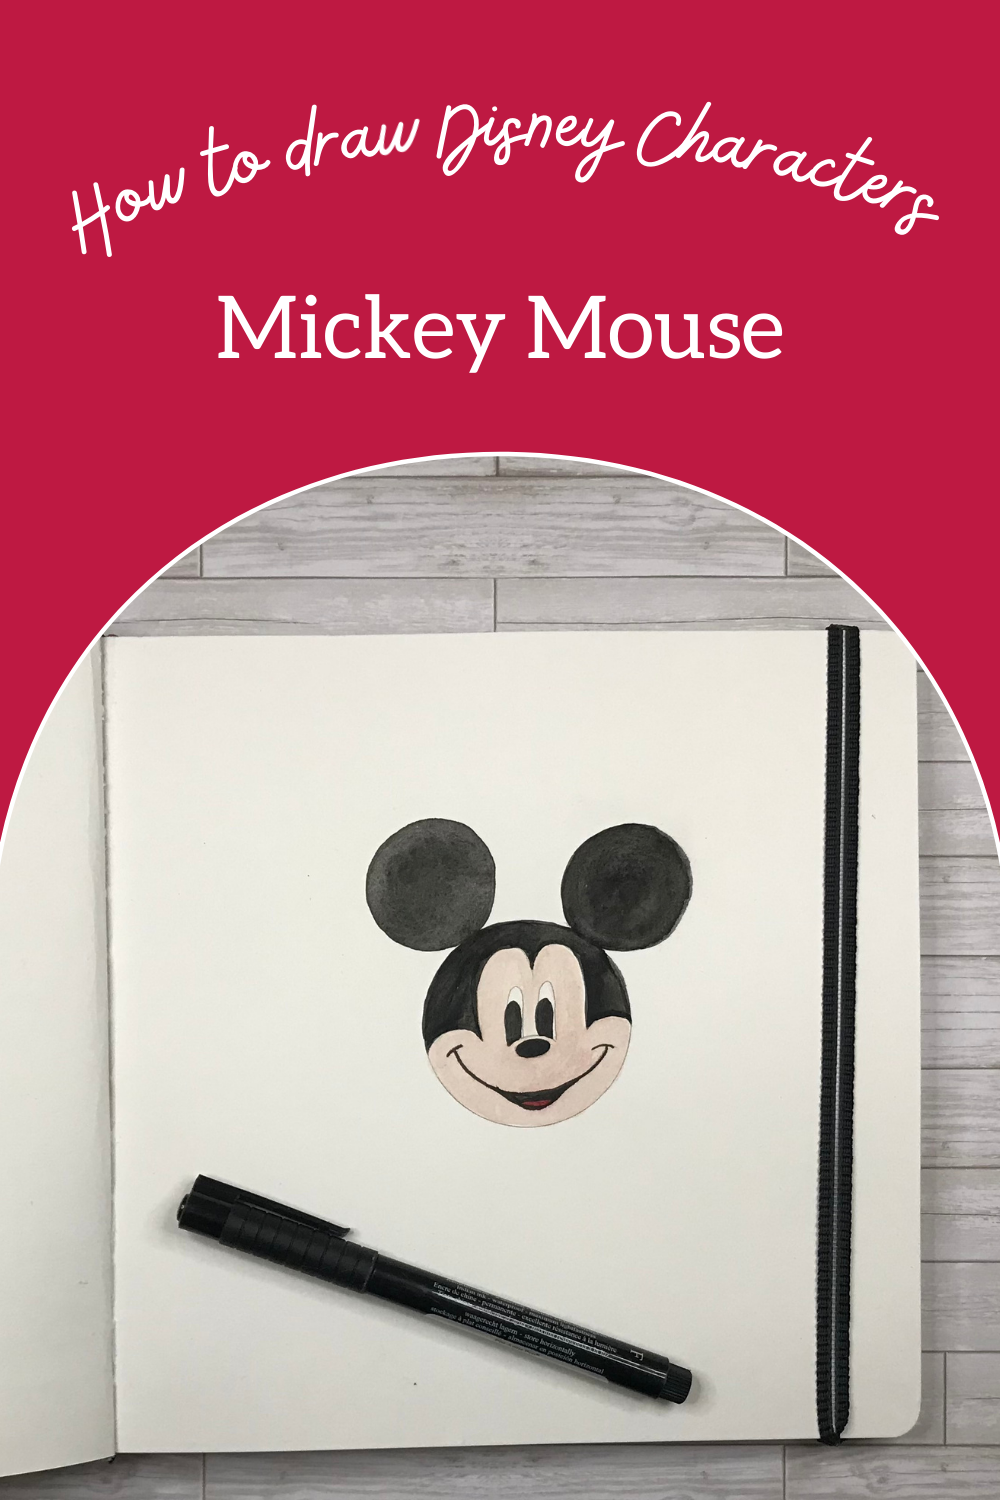 Mickey Mouse Drawing Easy | How To Draw Mickey Mouse | - YouTube-vachngandaiphat.com.vn